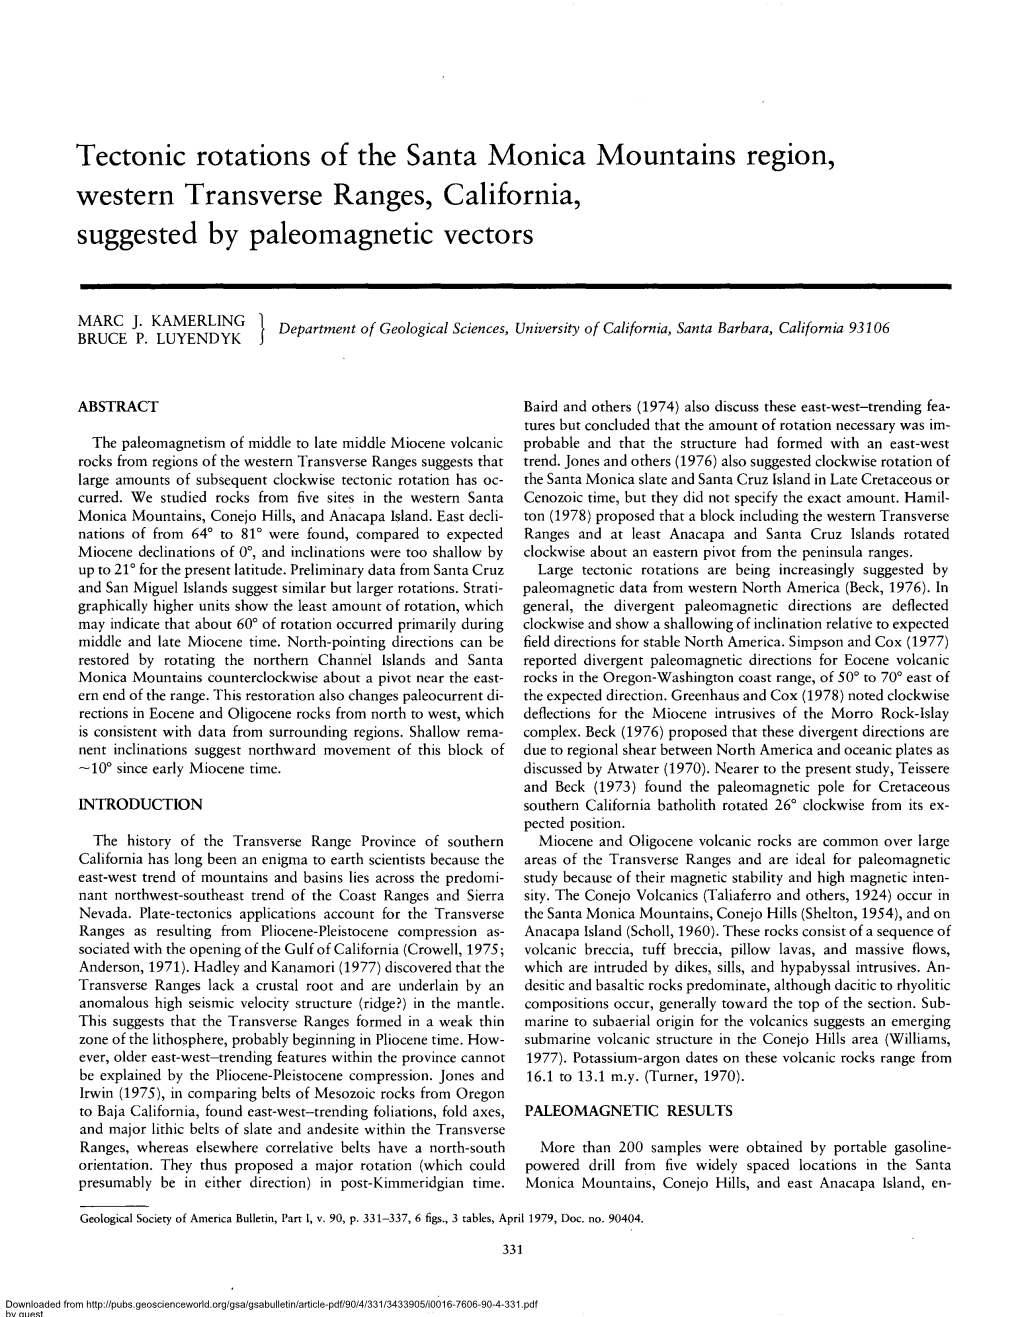 Tectonic Rotations of the Santa Monica Mountains Region, Western Transverse Ranges, California, Suggested by Paleomagnetic Vectors